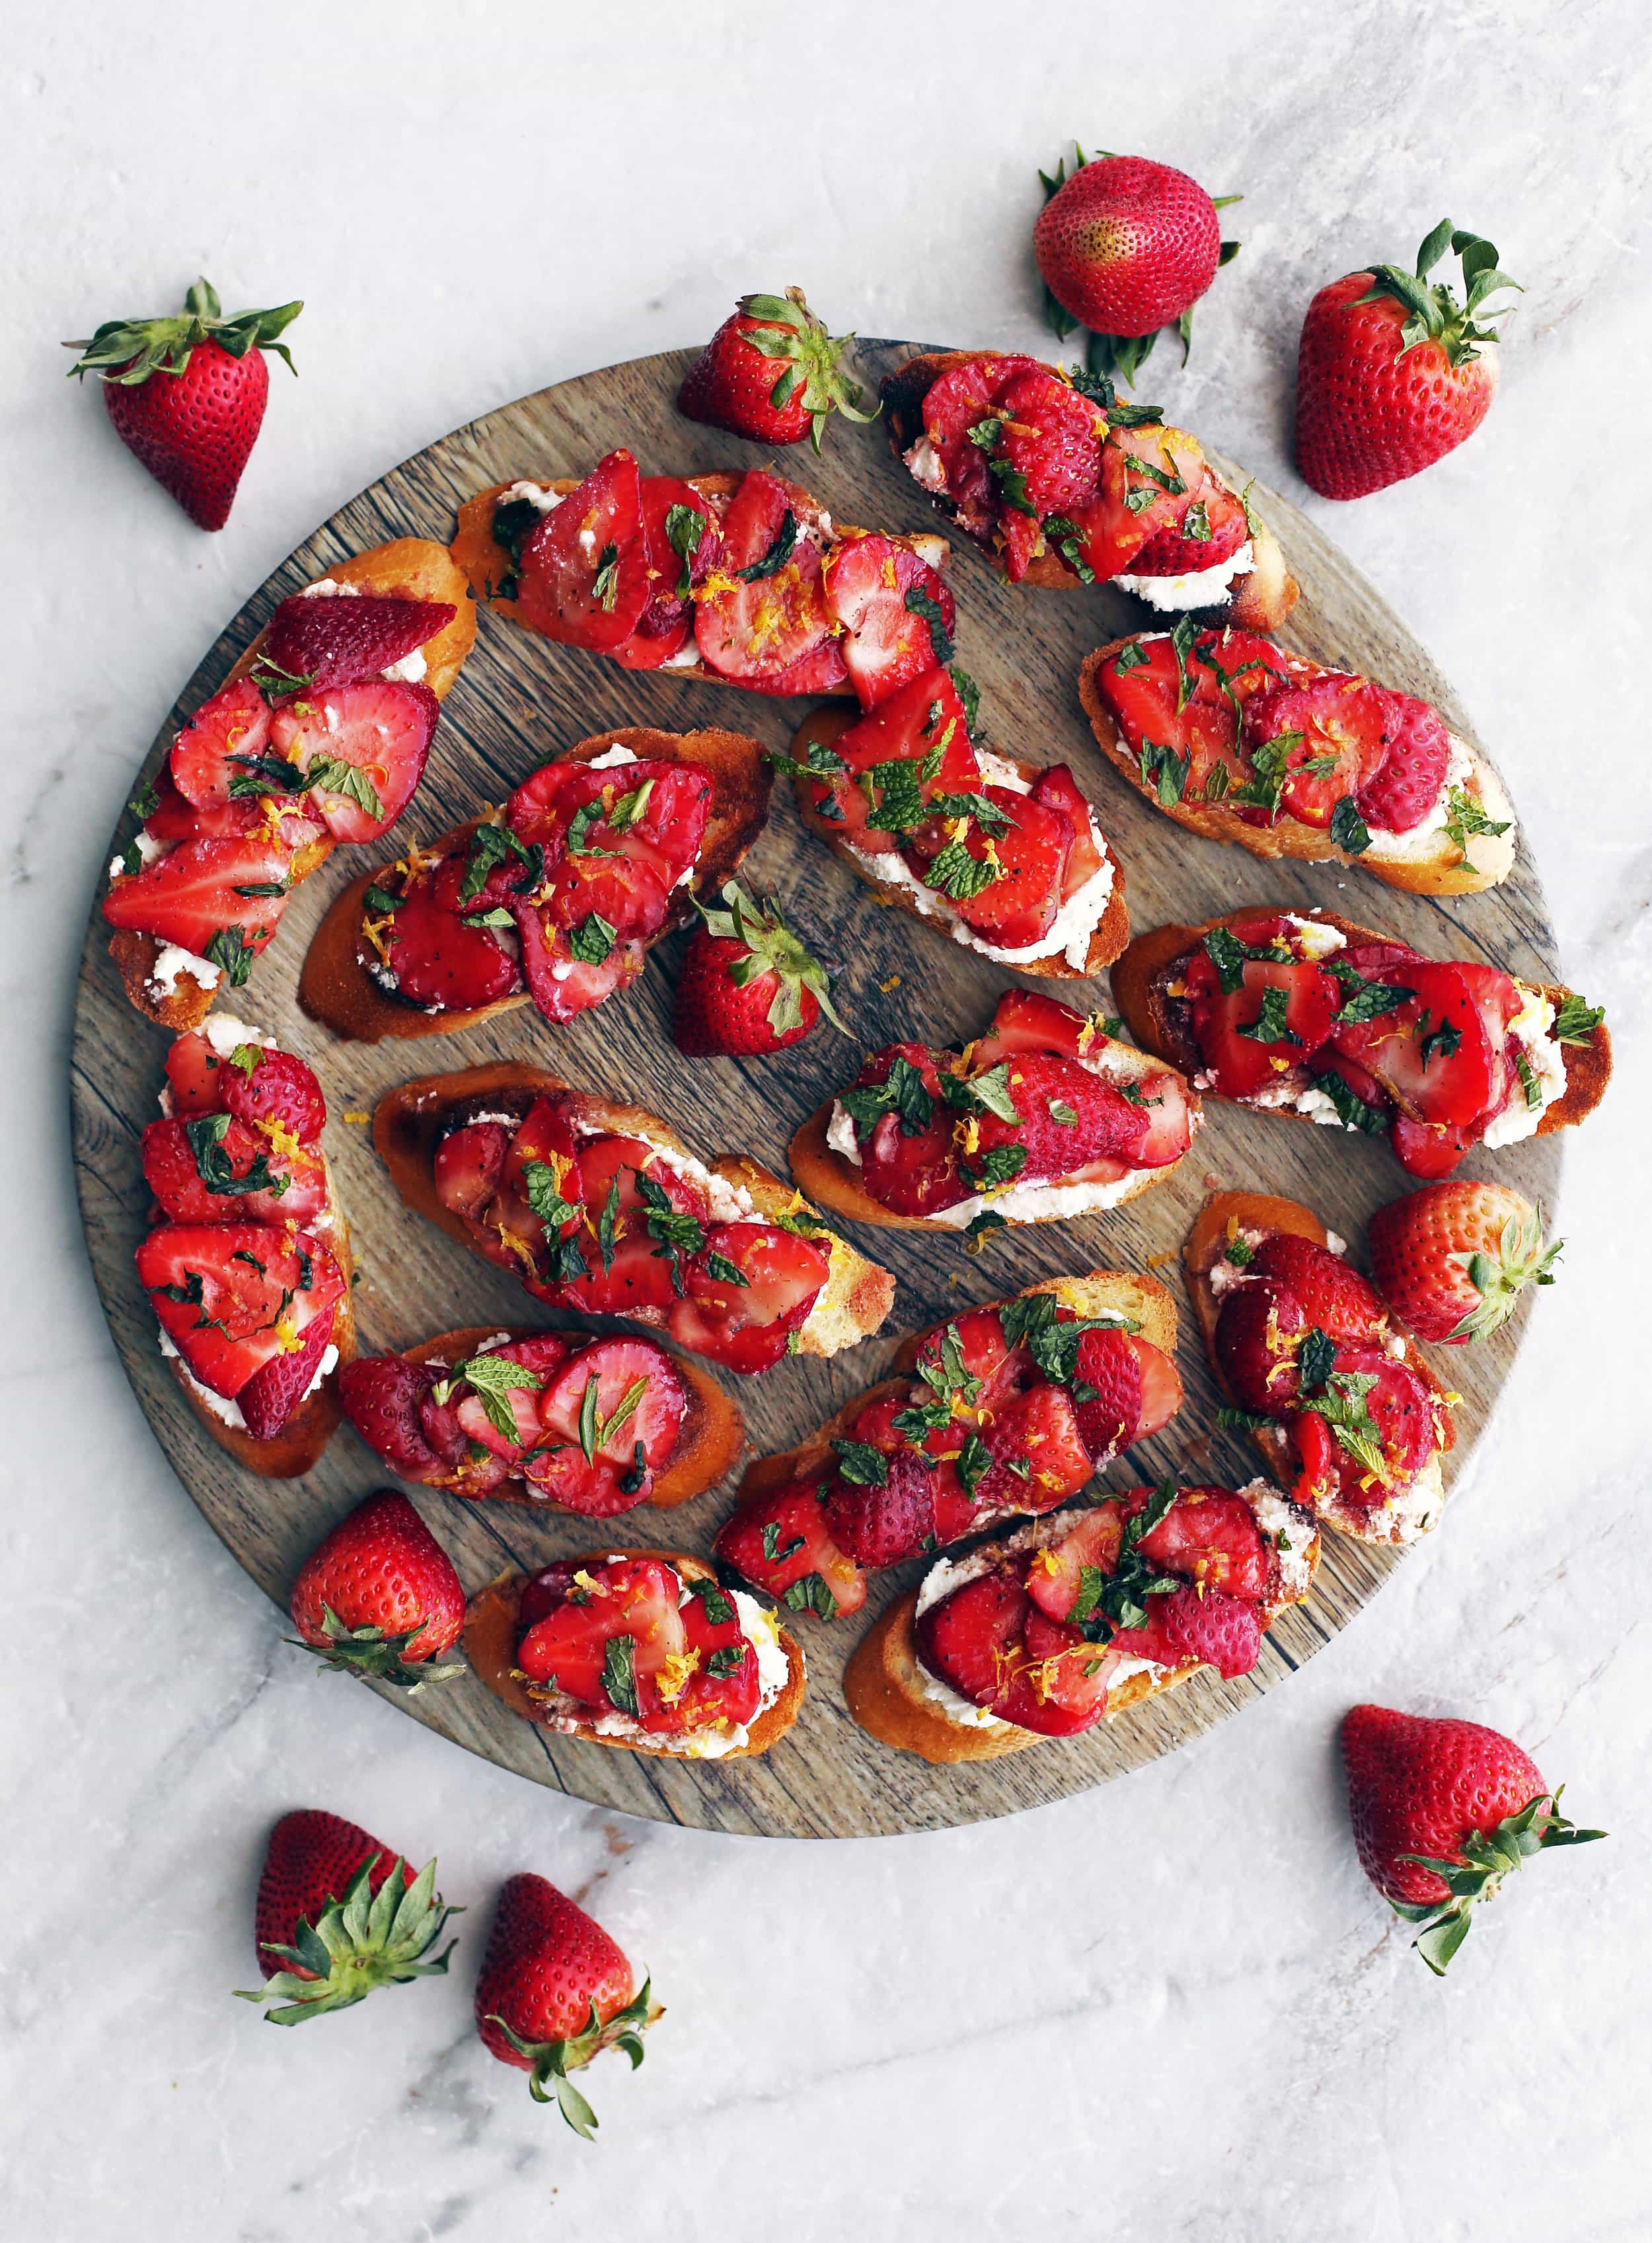 Overhead view of Balsamic Strawberry Ricotta Crostini garnished with mint and lemon zest on a large round platter.